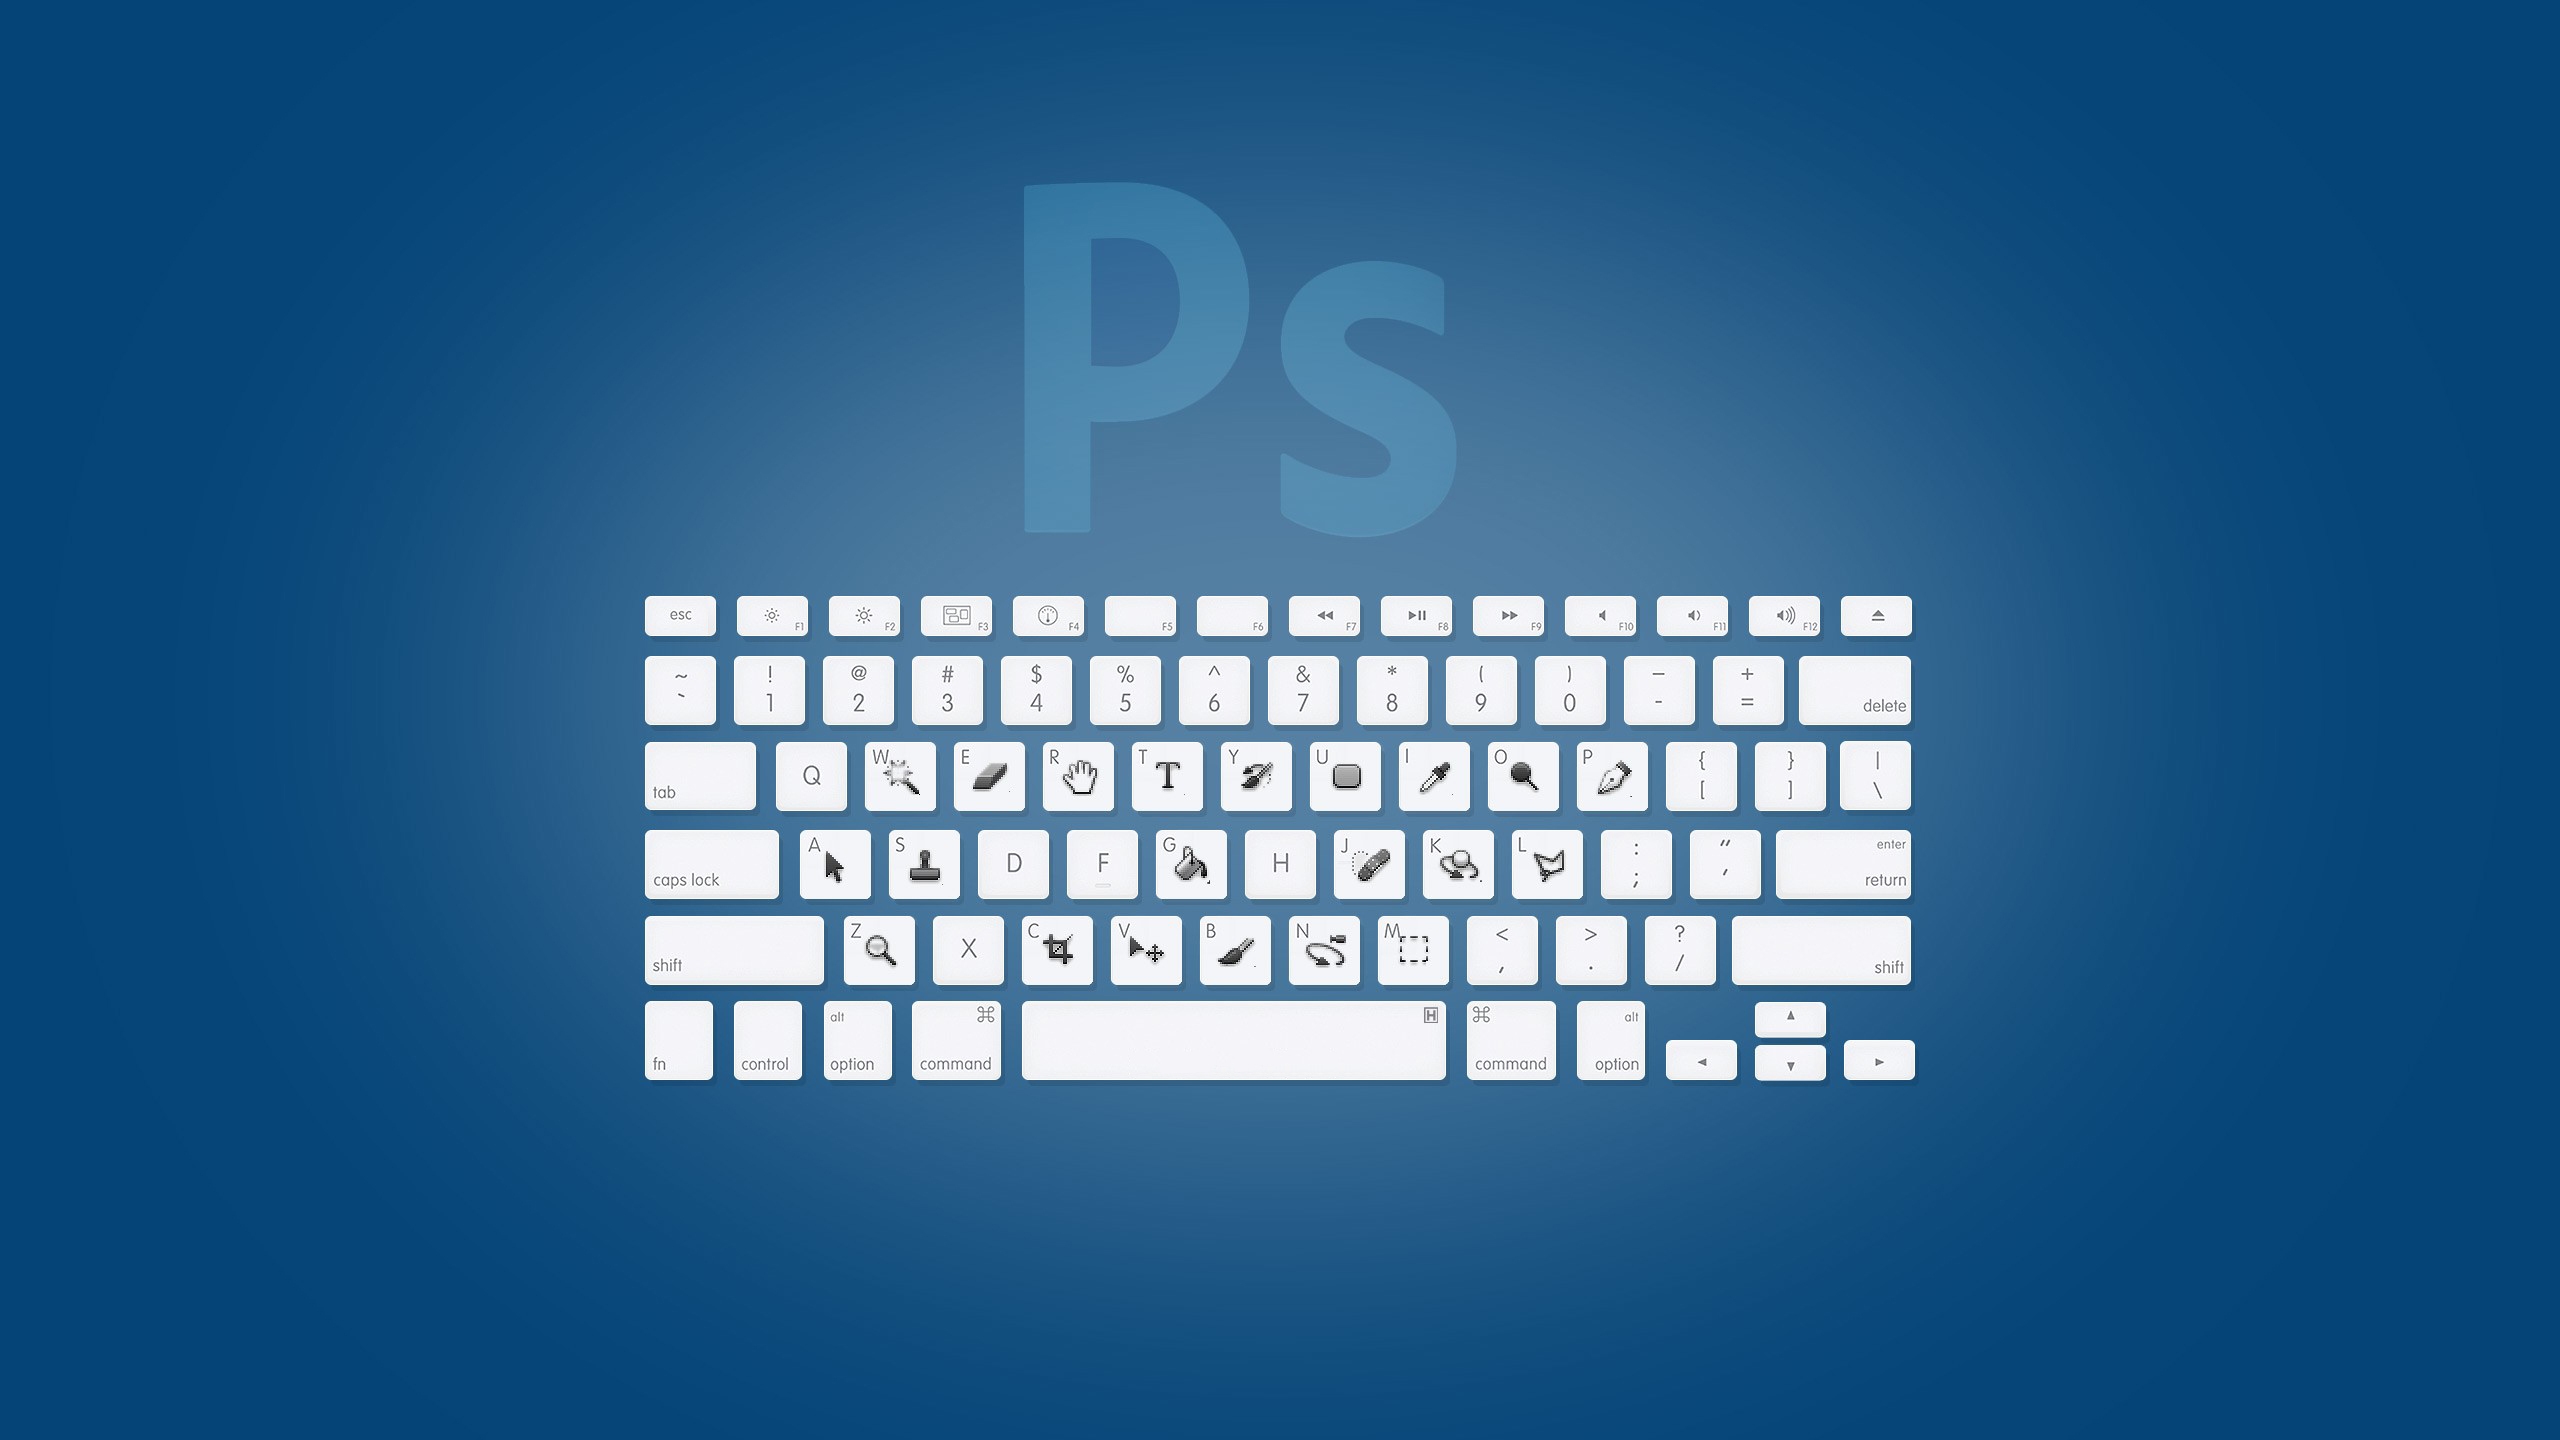 Photoshop Keyboard for 2560x1440 HDTV resolution